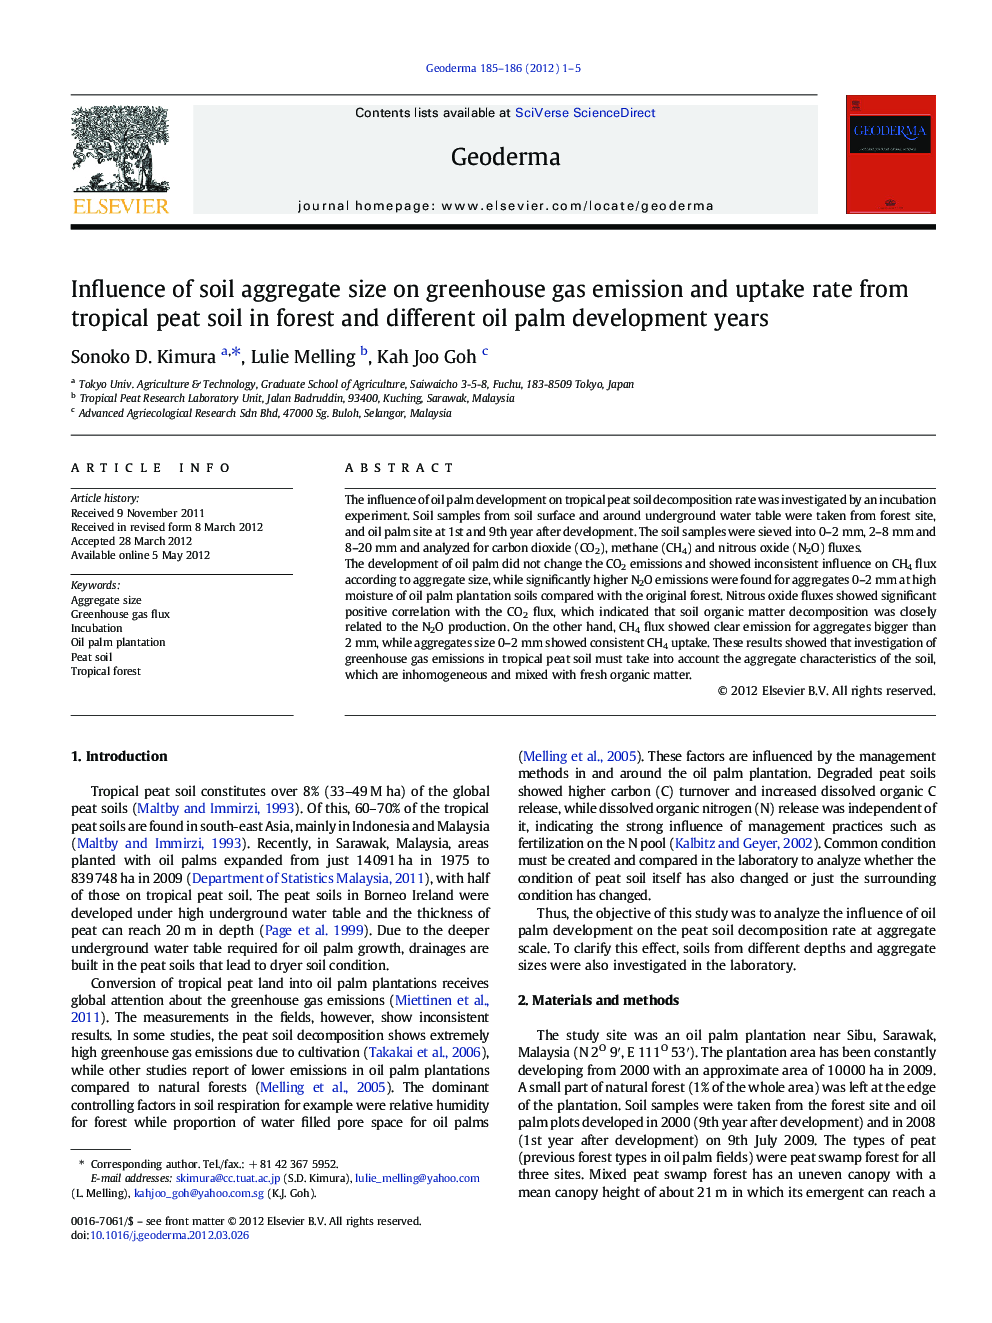 Influence of soil aggregate size on greenhouse gas emission and uptake rate from tropical peat soil in forest and different oil palm development years